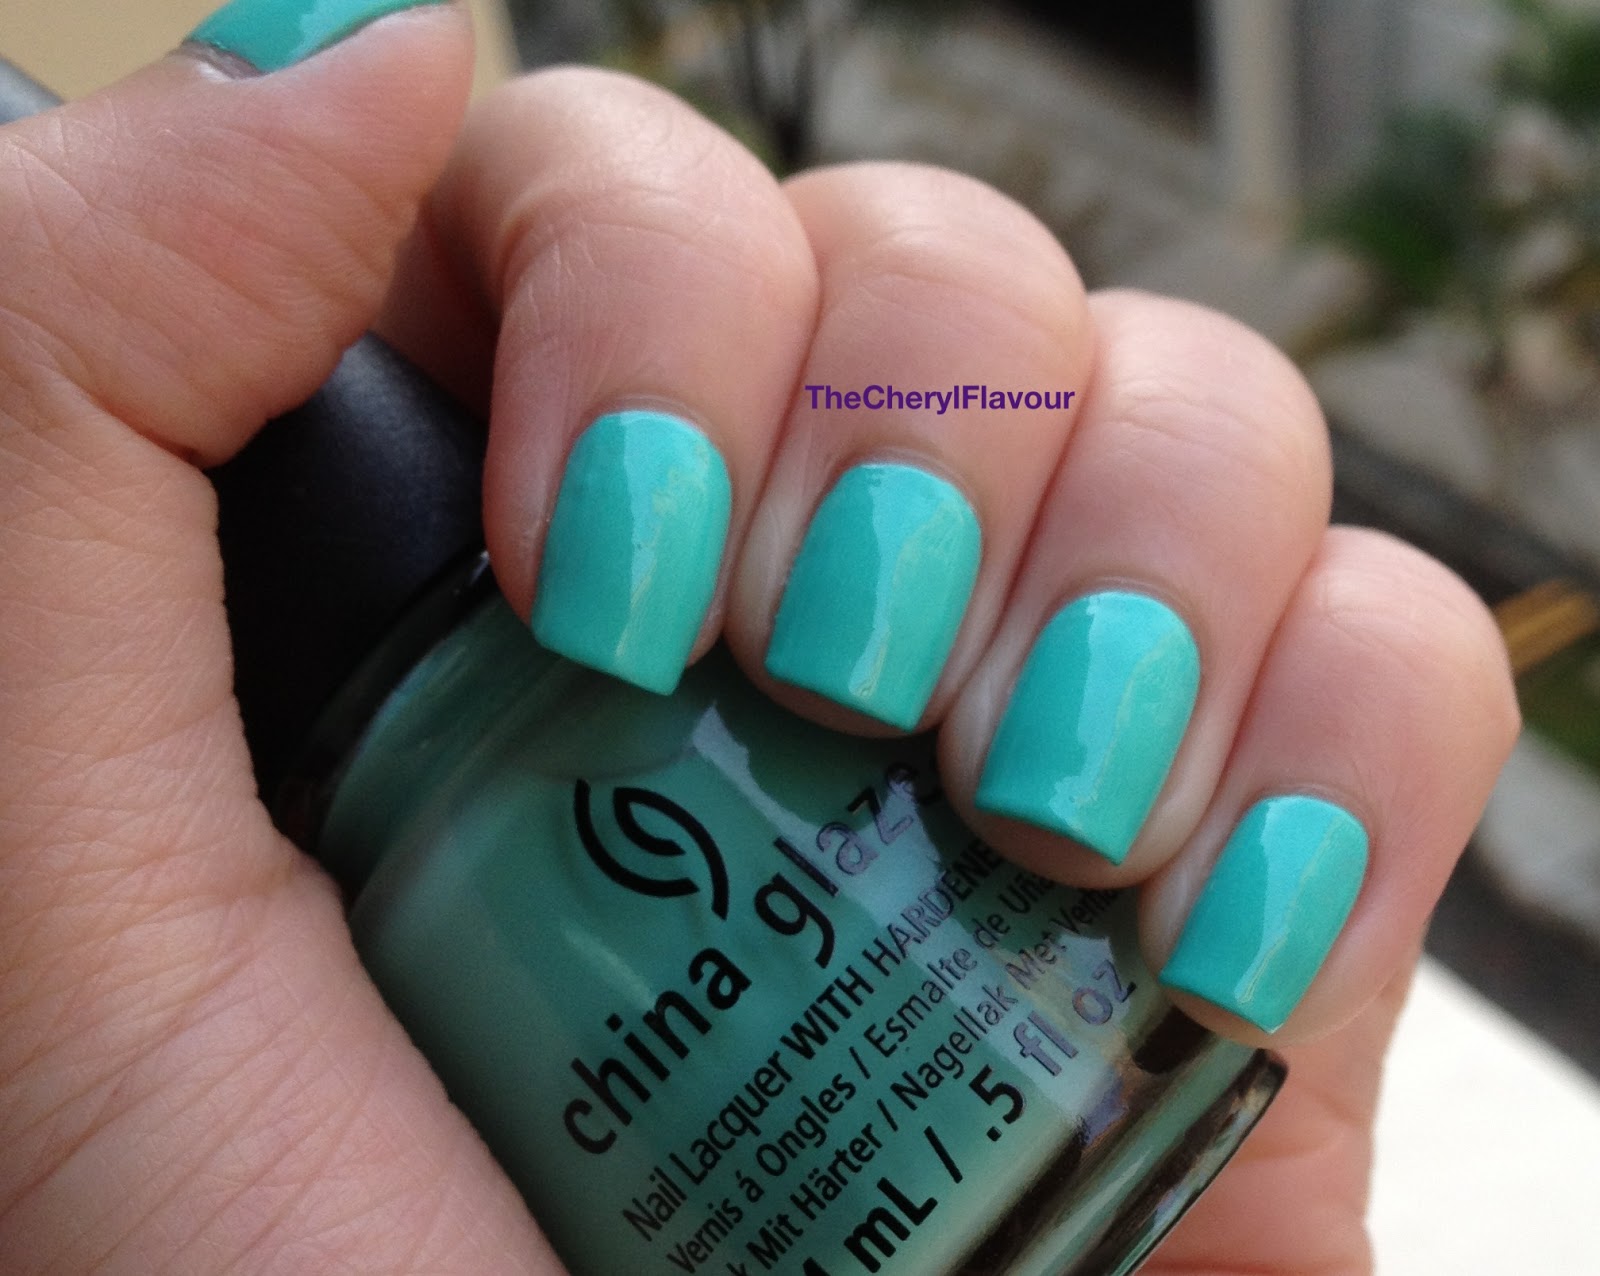 3. China Glaze Nail Lacquer in "Too Yacht to Handle" - wide 4